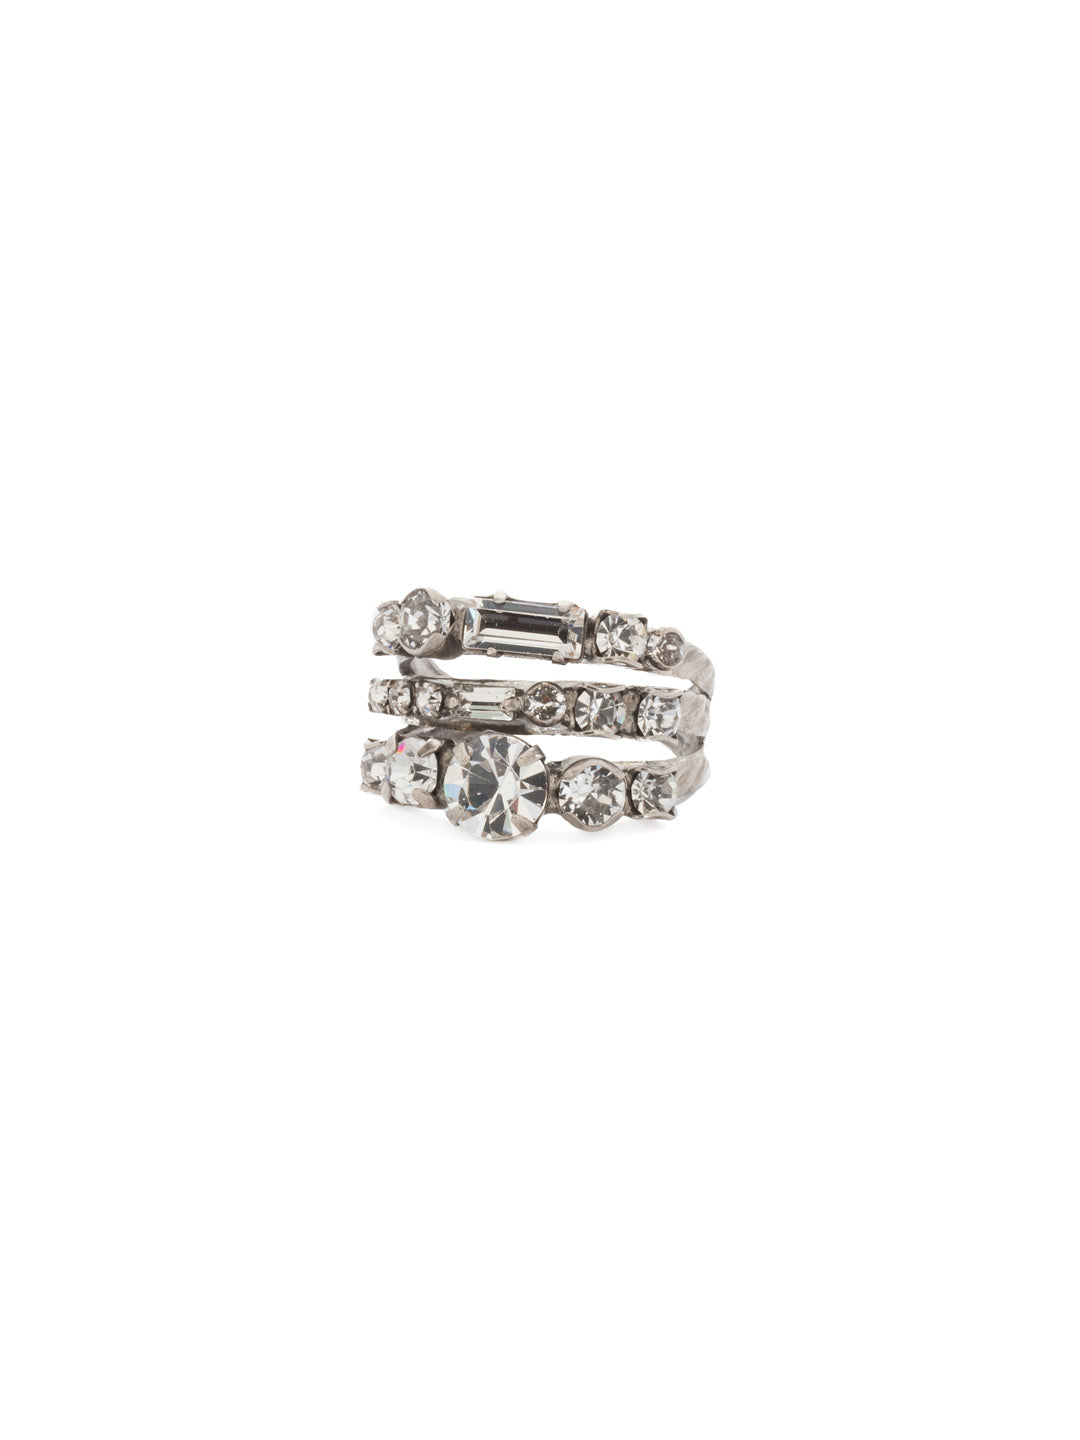 Triple Threat Stacked Ring - RDK23ASCRY - <p>Three rows of crystal encrusted bands are joined together for a stacked, stylish look. From Sorrelli's Crystal collection in our Antique Silver-tone finish.</p>